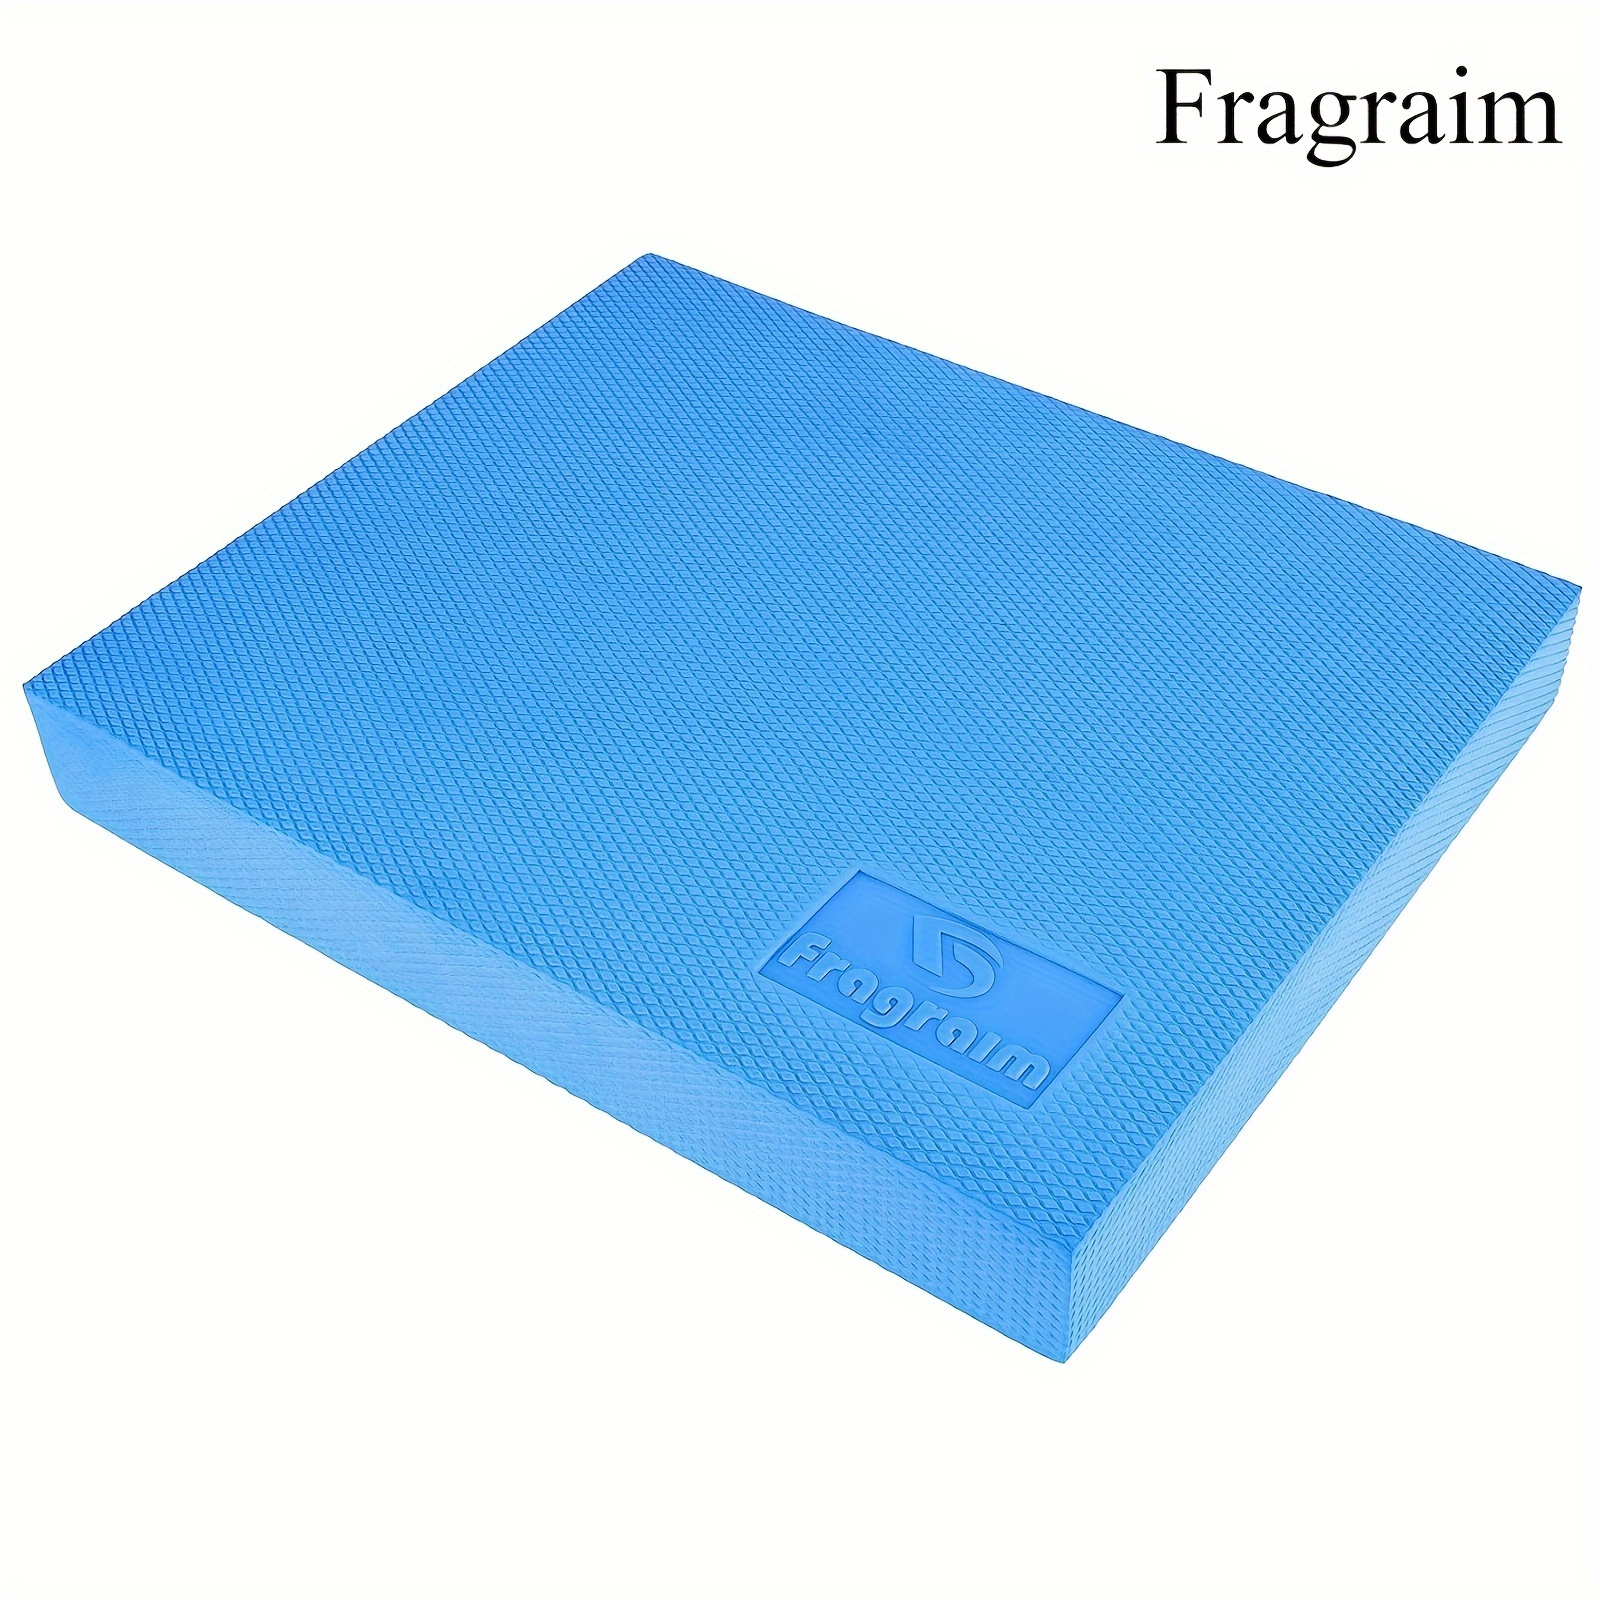 

1pc Thicken Balance Pad, Non-slip Yoga Kneeling Mat, Suitable For Yoga Stretching, Physical Therapy, Rehabilitation, And Stability Training, Yoga & Fitness